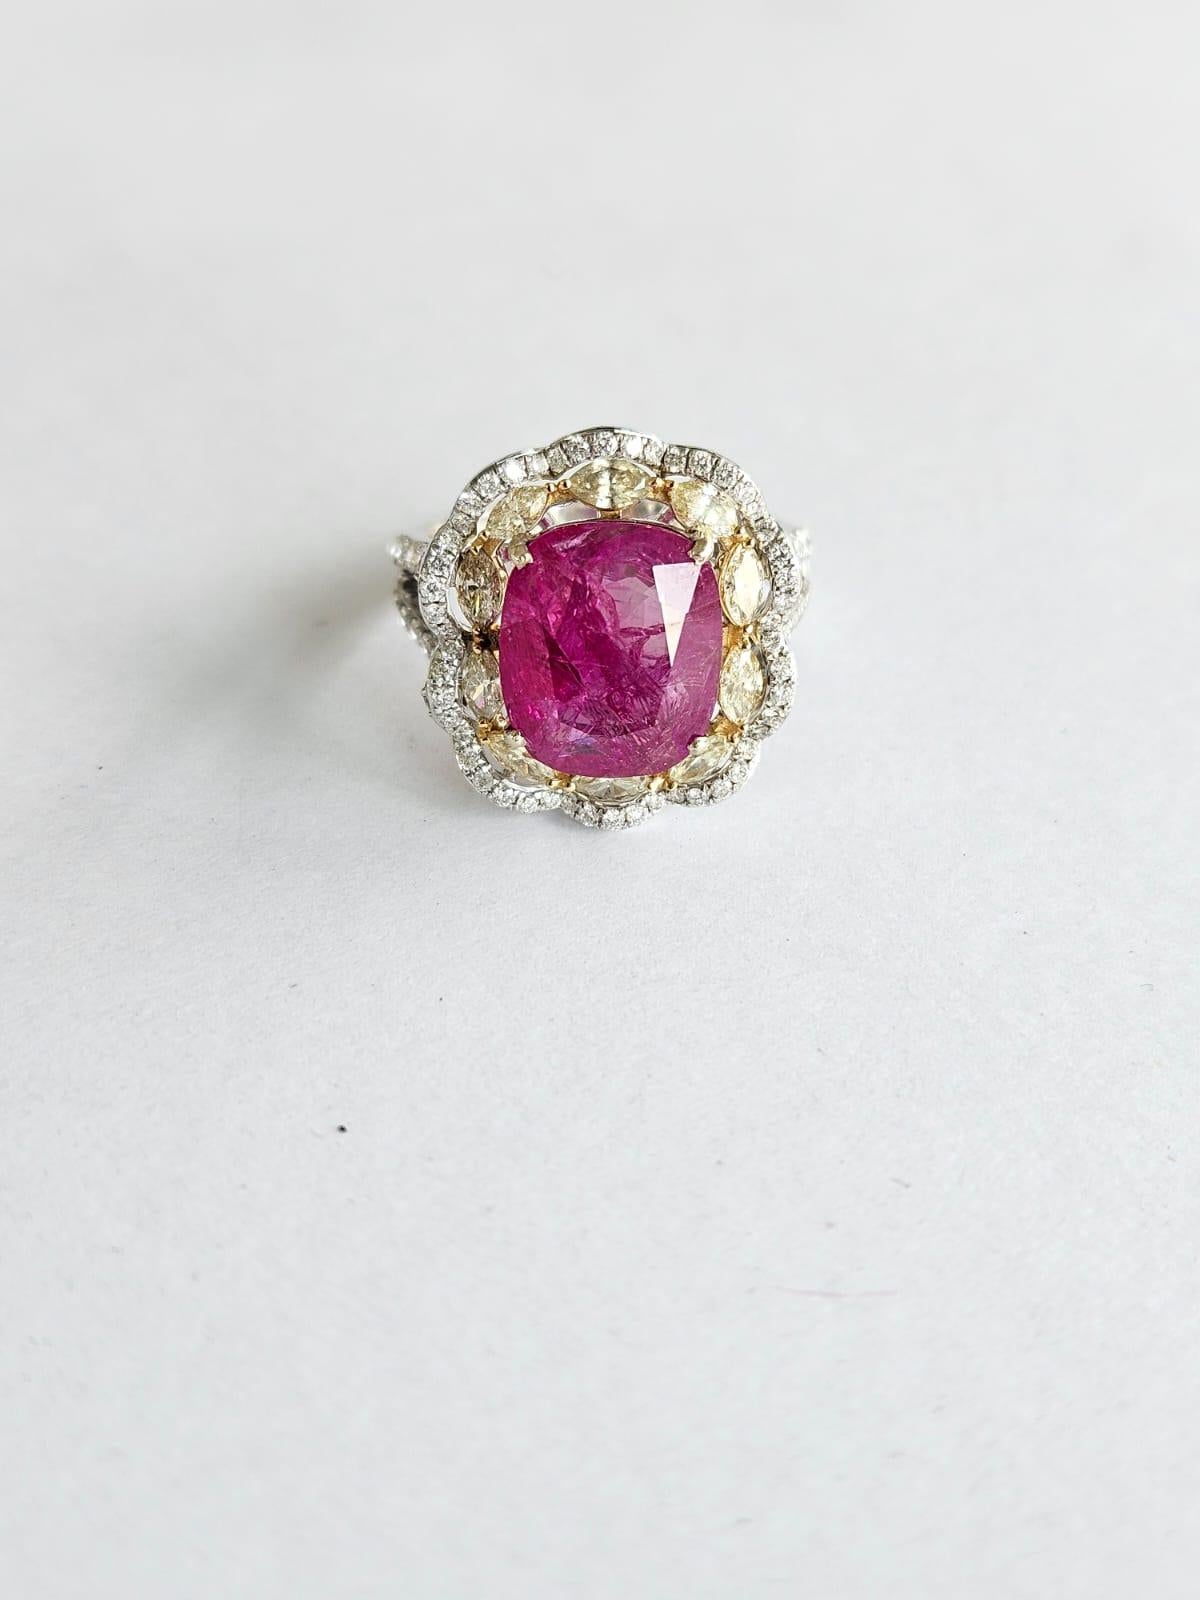 GJEPC Certified 6.24 carats unheat natural Burma Ruby & Diamonds Engagement Ring In New Condition For Sale In Hong Kong, HK